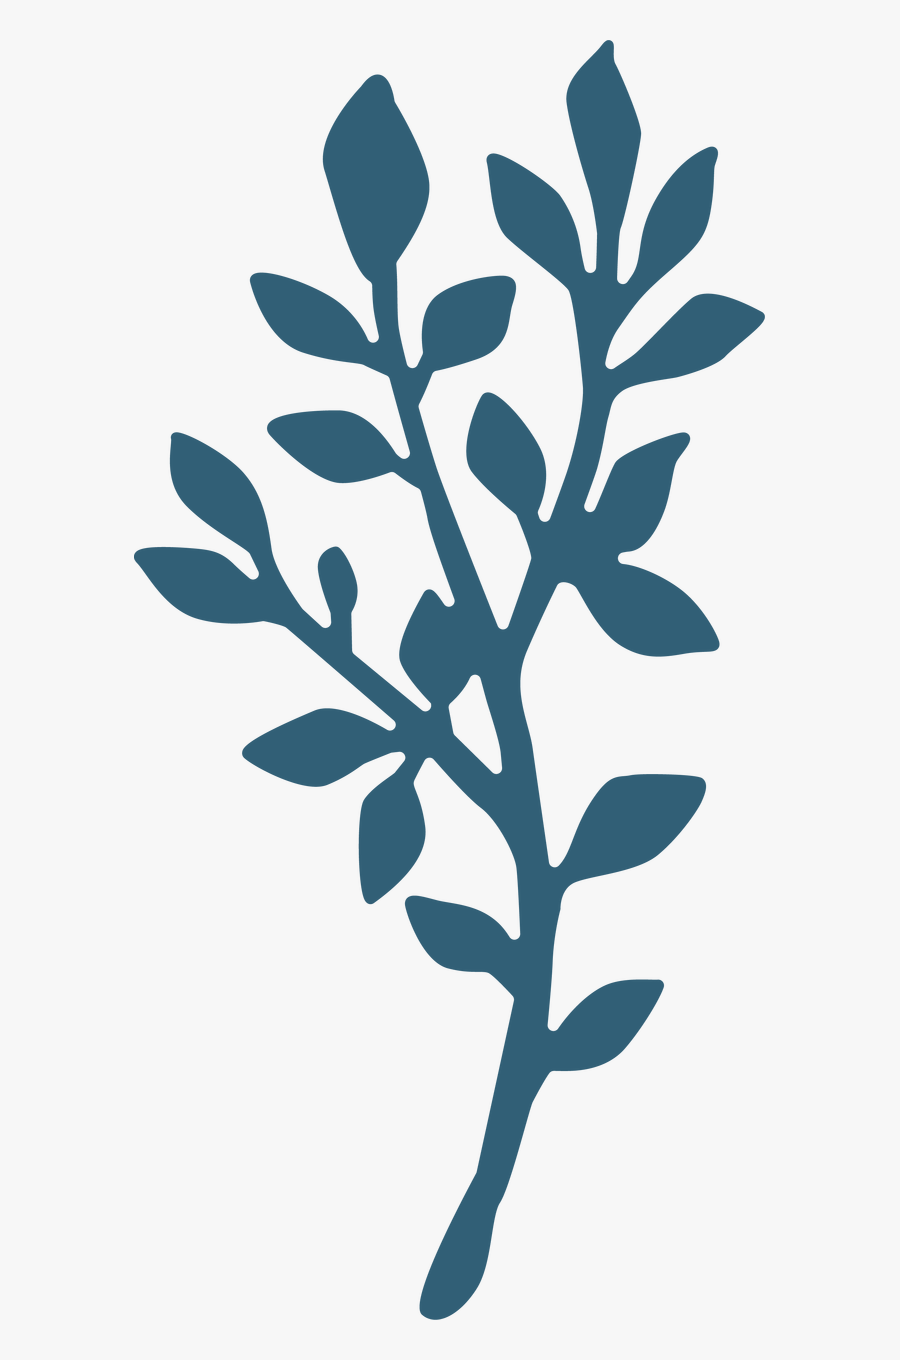 Greenery, Transparent Clipart